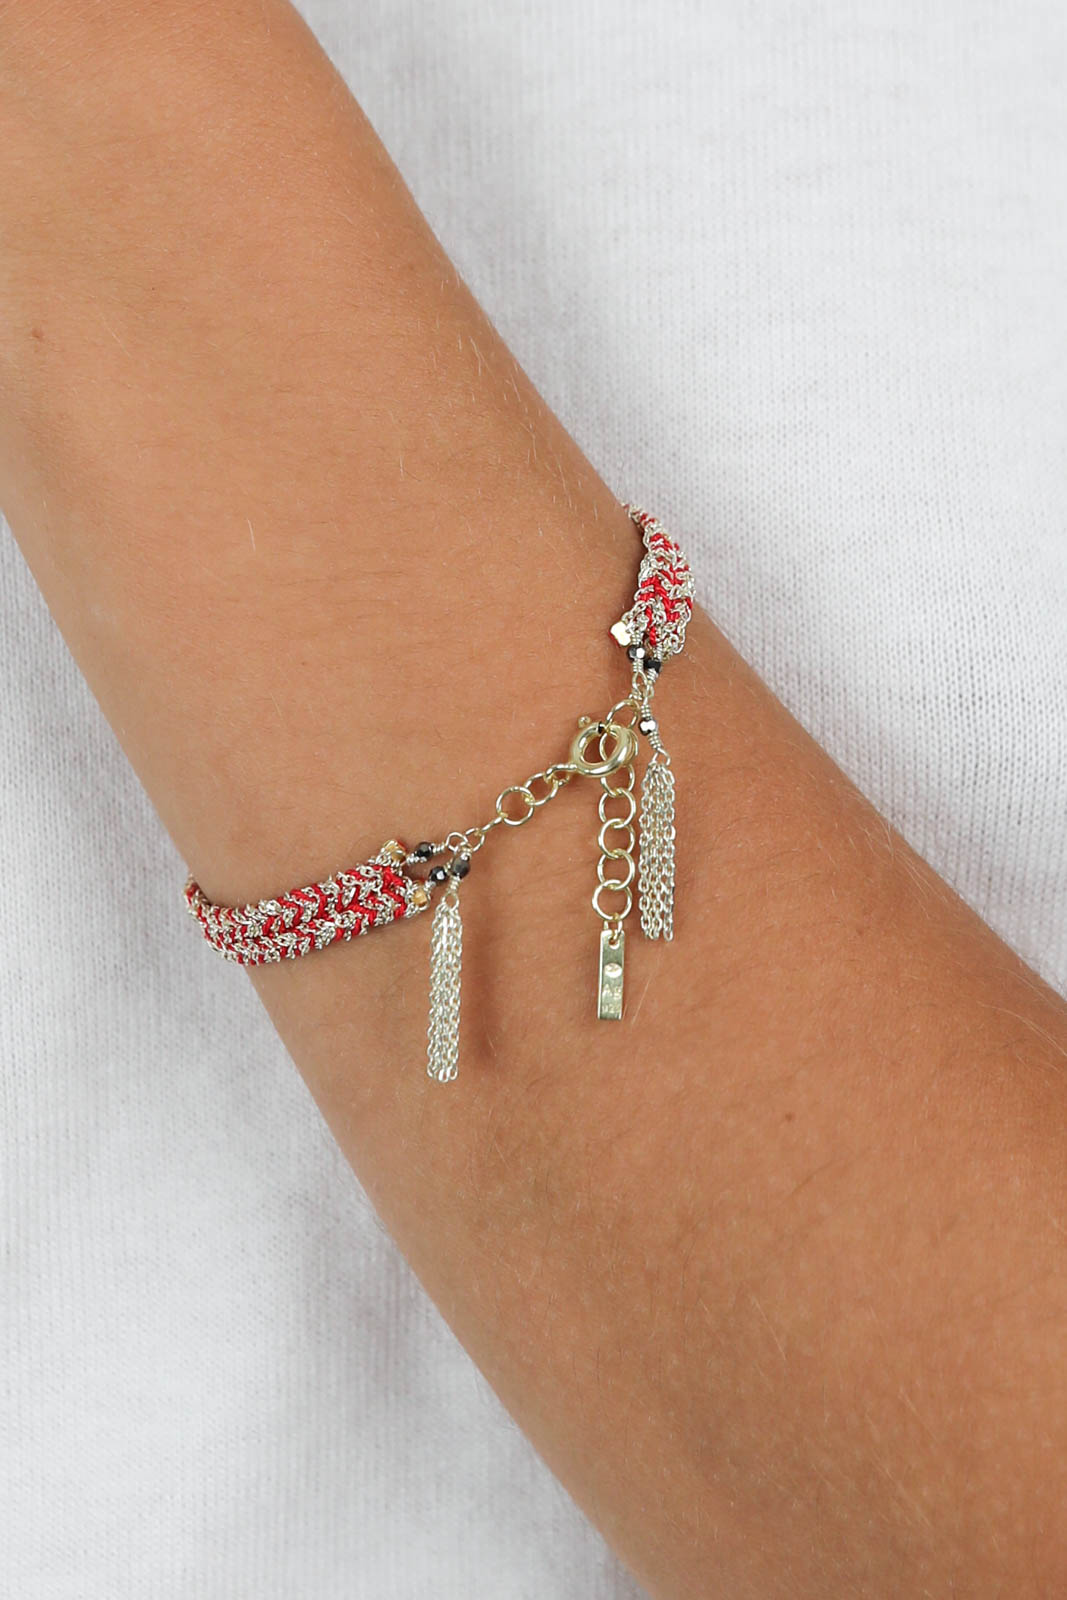 Armband N° 183 in Gold/Red